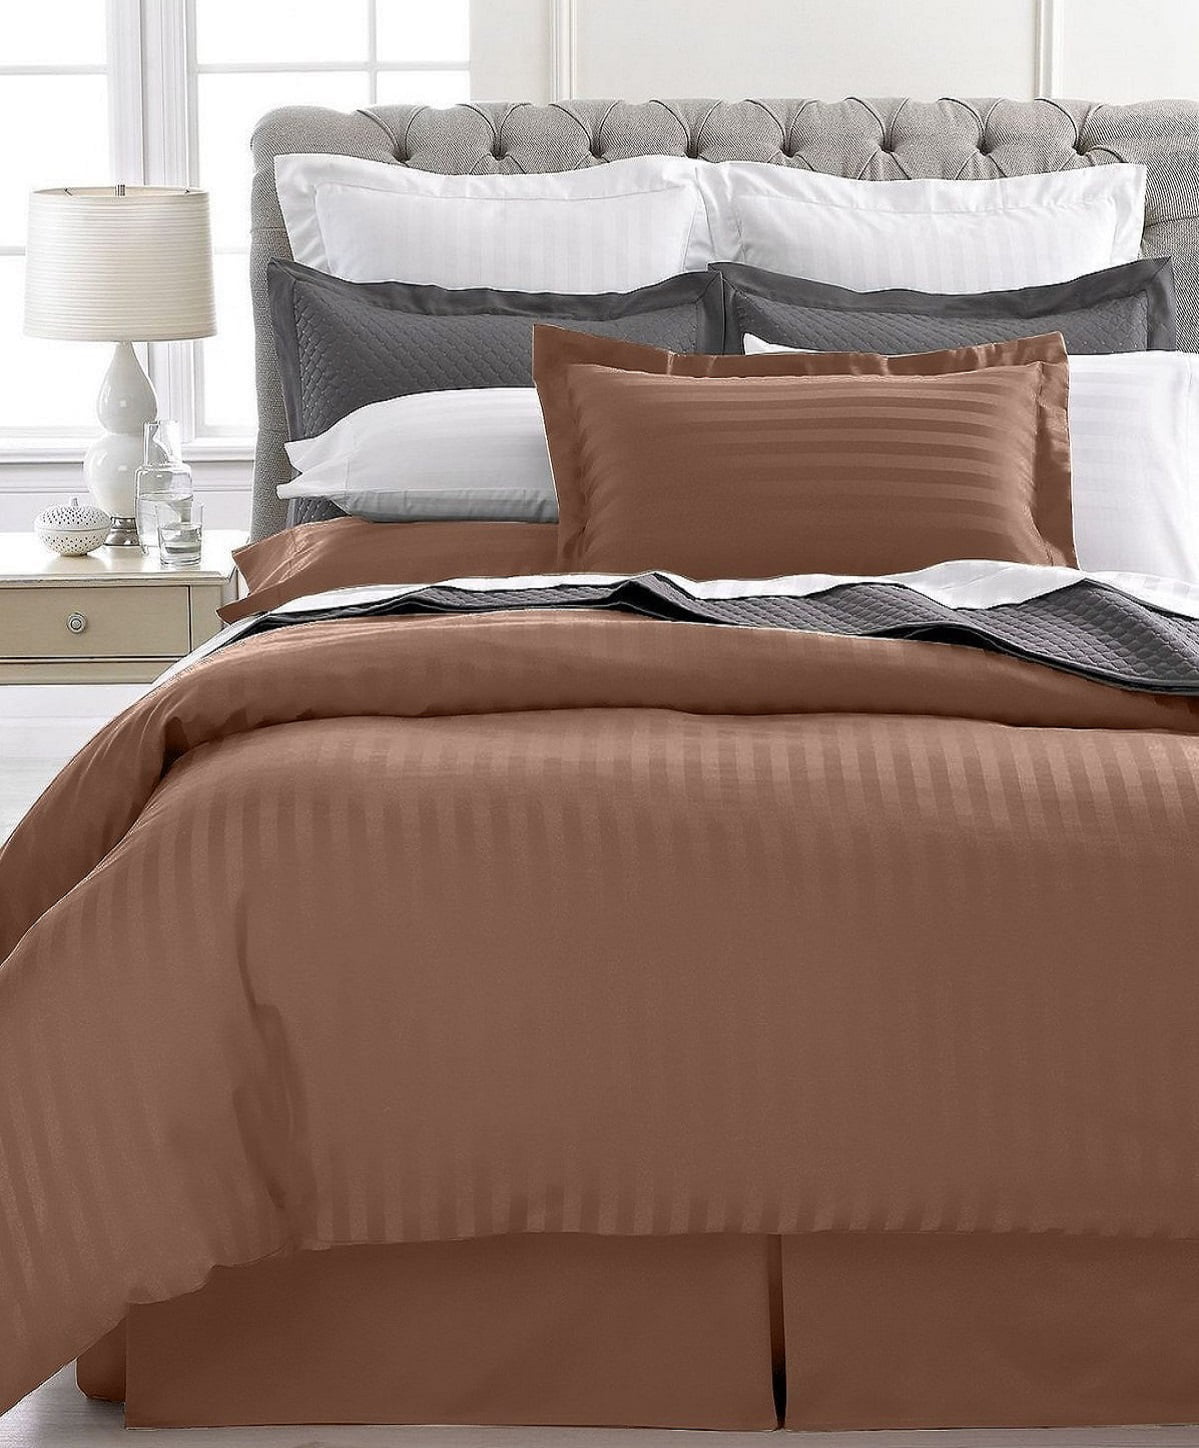 Striped Duvet Set Full Queen Brown, Brown And White Striped Duvet Cover